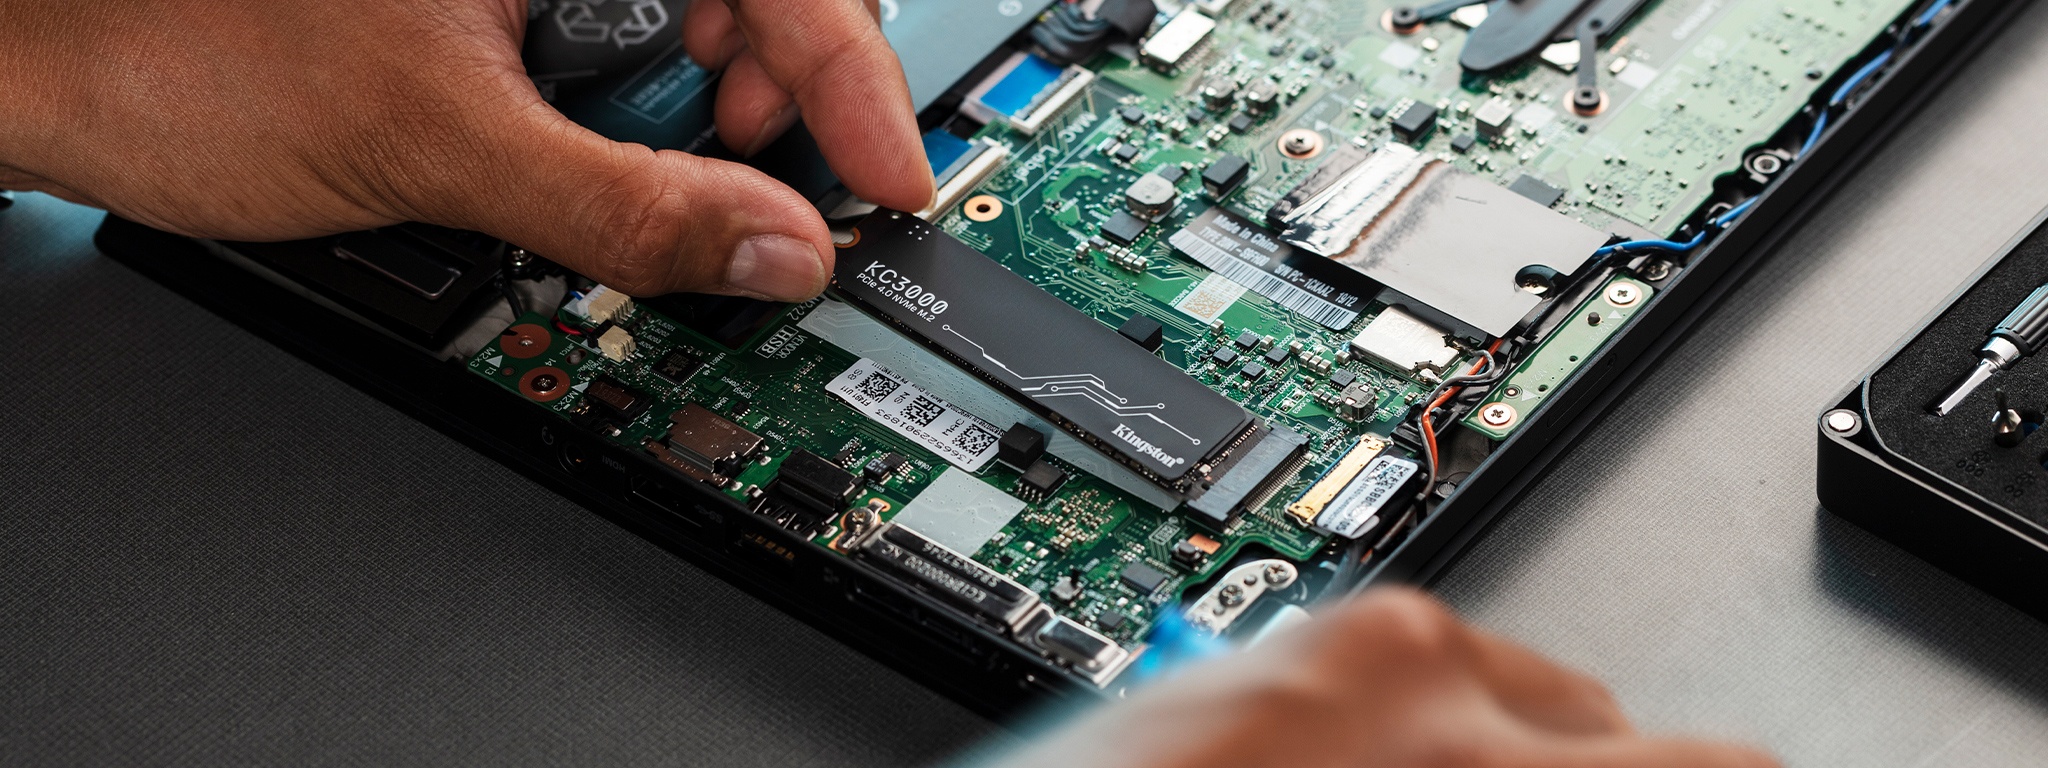 A hand installing KC3000 SSD into a laptop